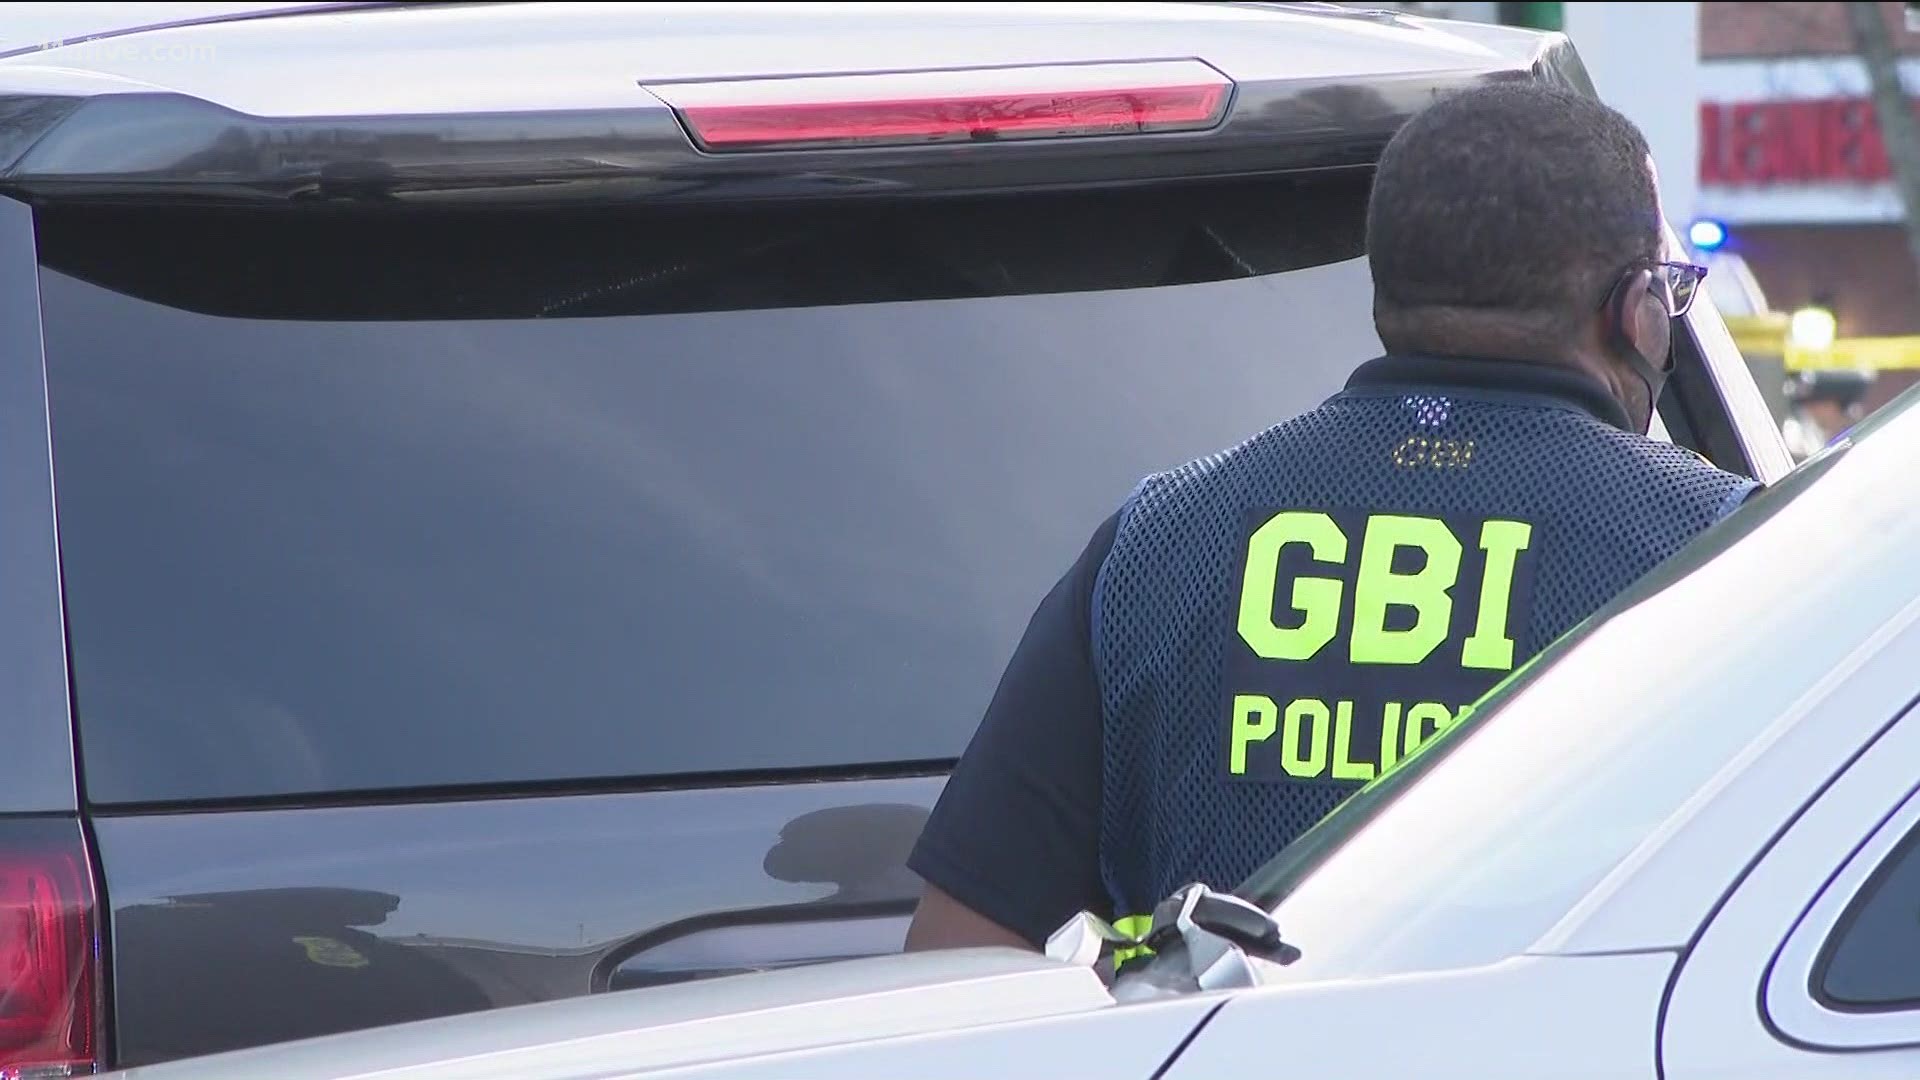 By this time last year, the GBI had only investigated 83 shootings involving police.